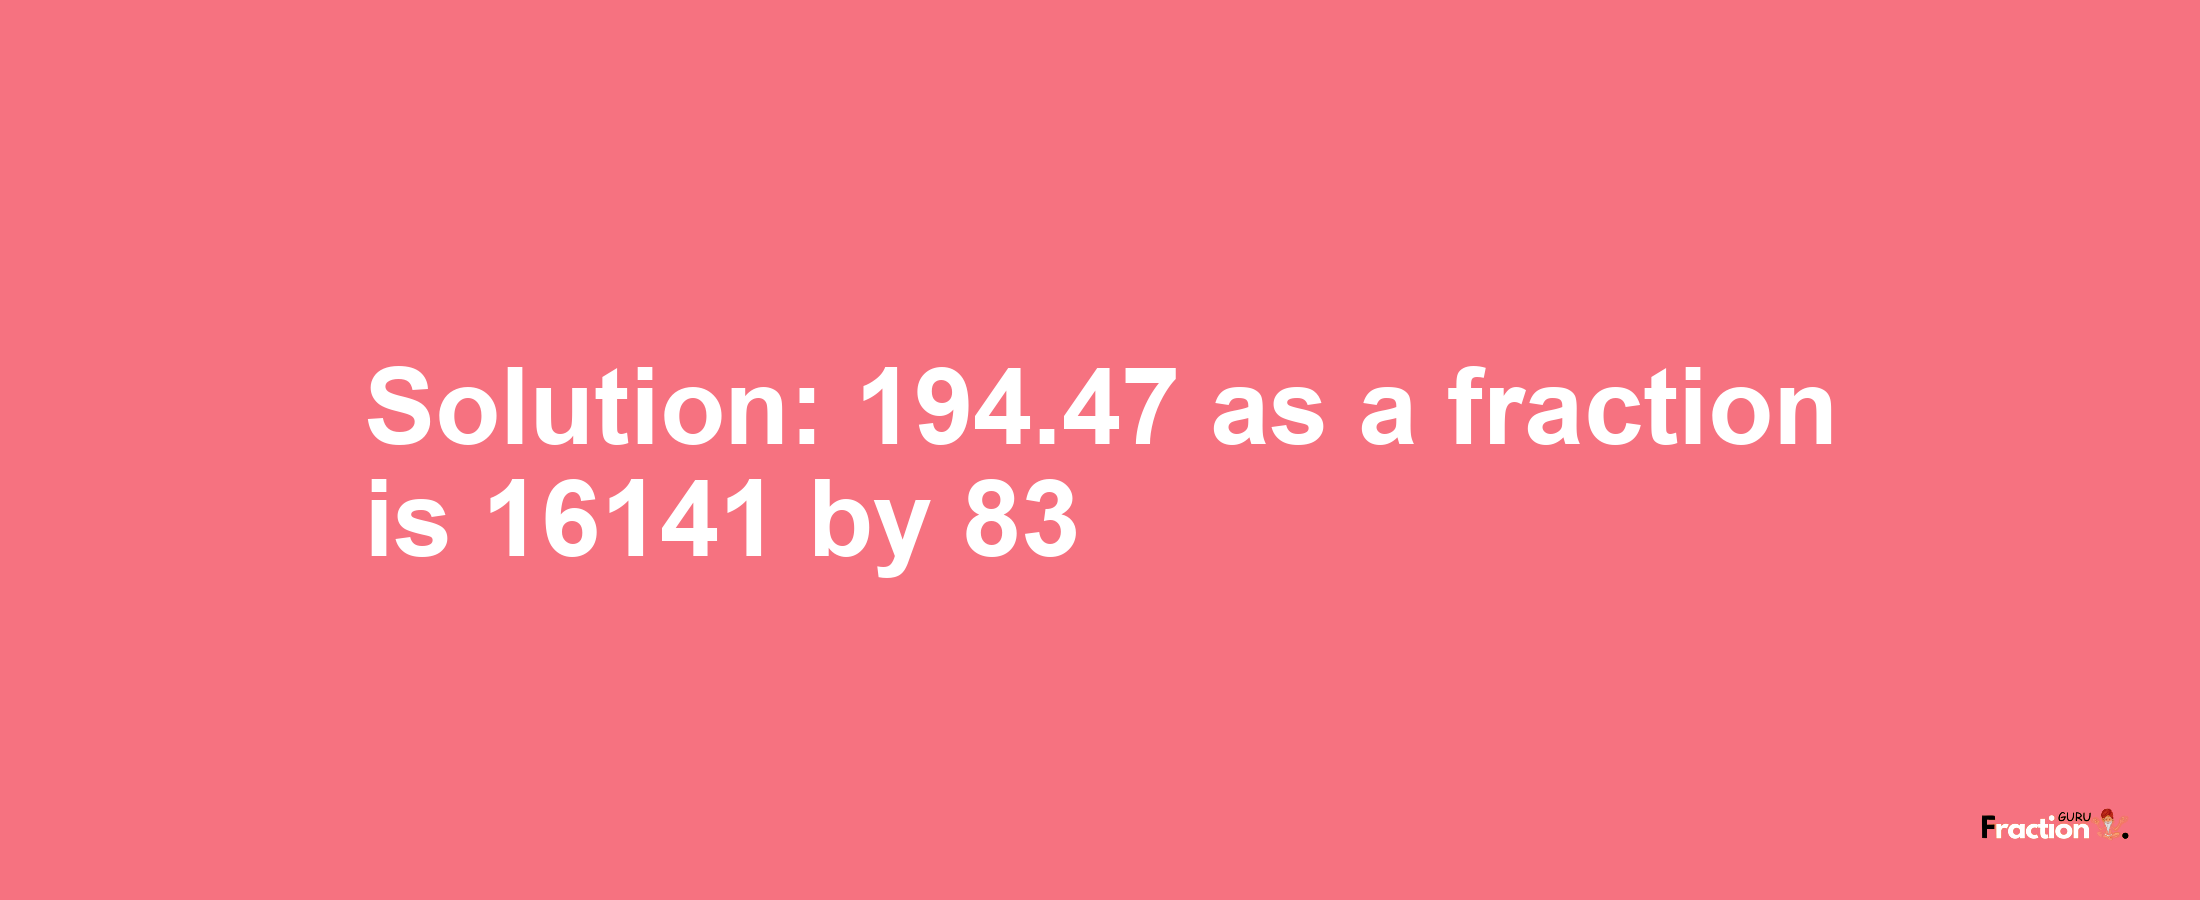 Solution:194.47 as a fraction is 16141/83